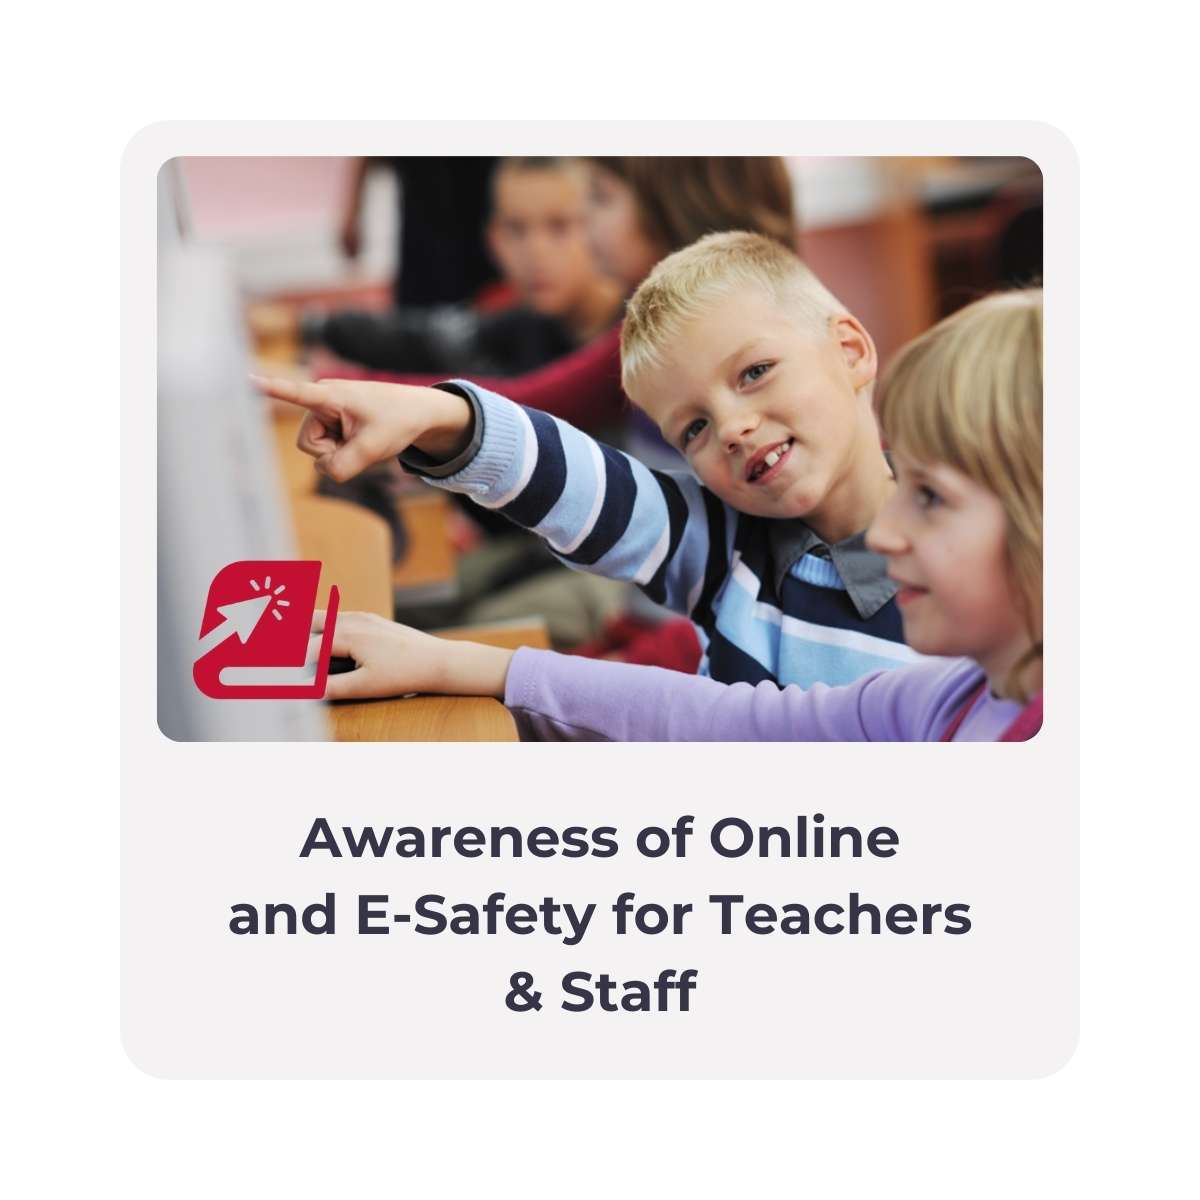 Awareness of Online and E-Safety